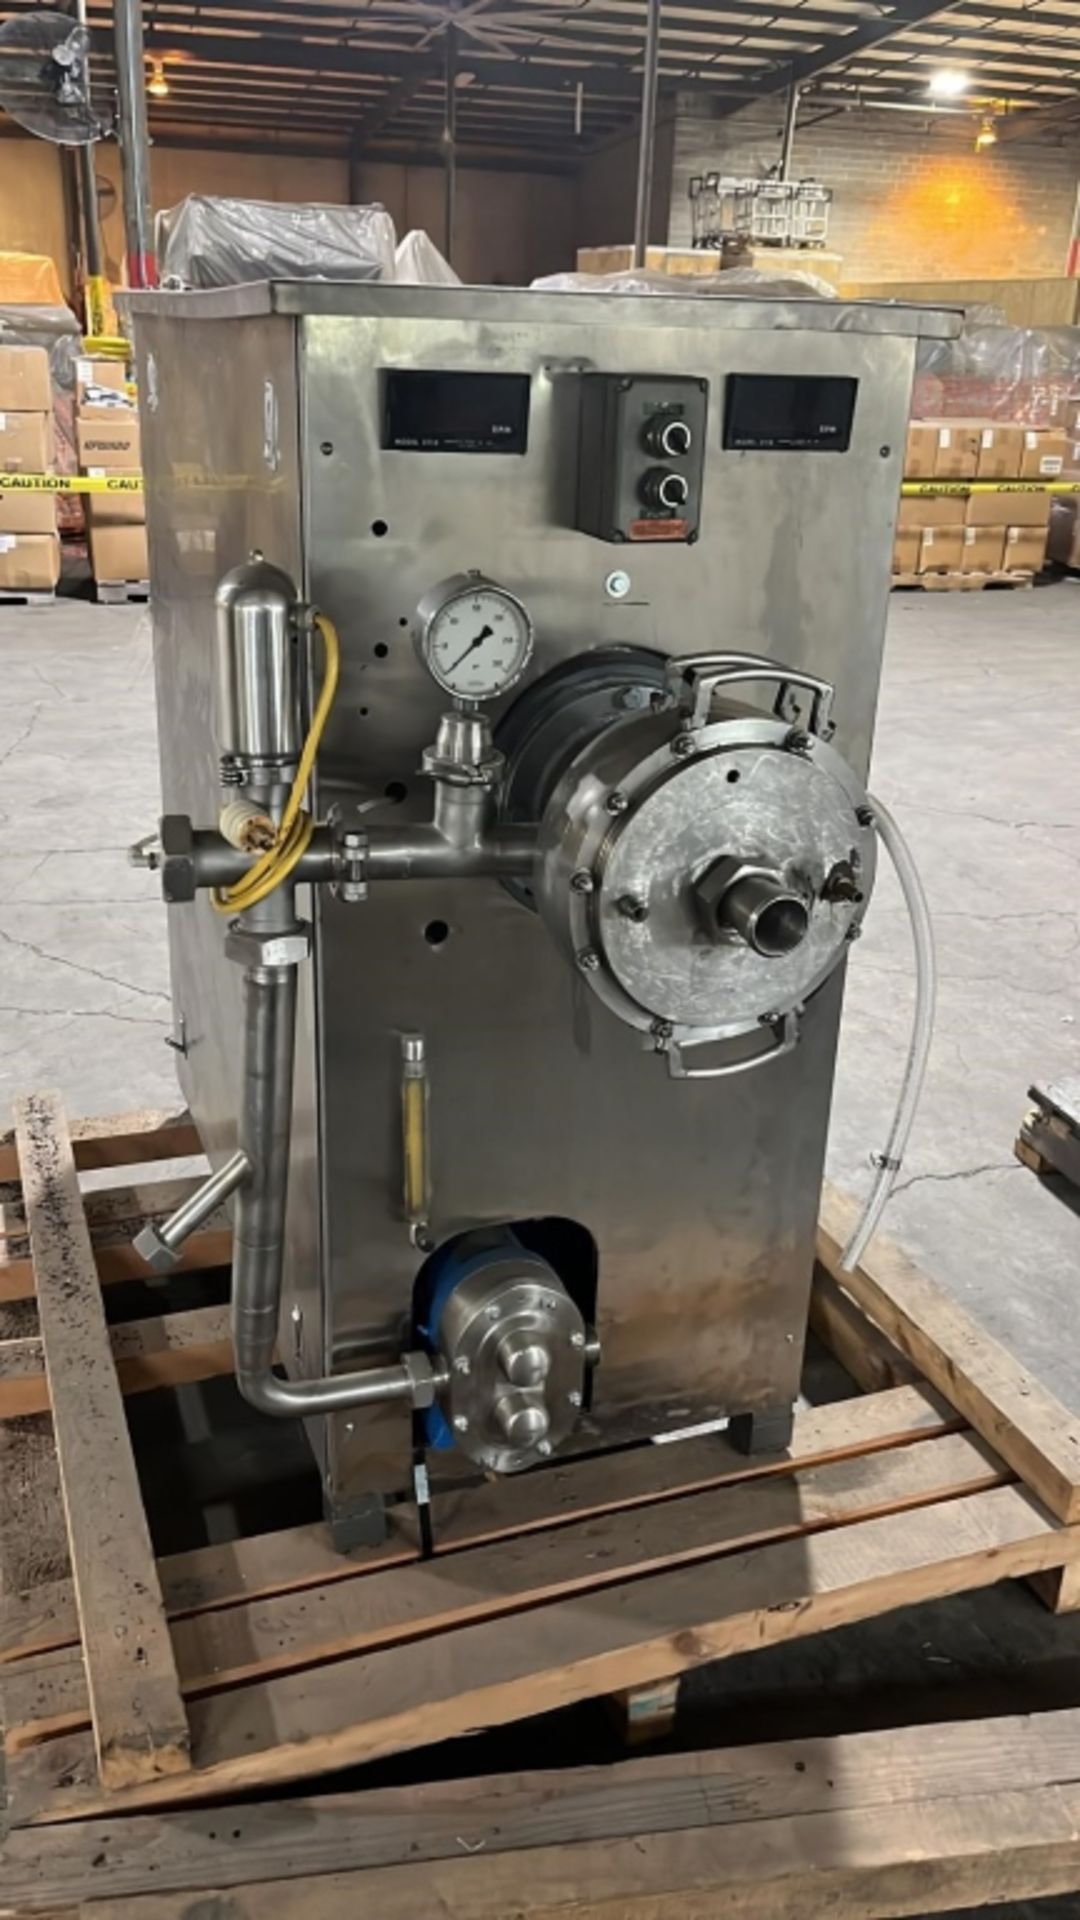 Goodway Continuous Mixer, S/N QC002-2011, Includes 150 Litre Batter Holding Tank, S/S Holding Tank